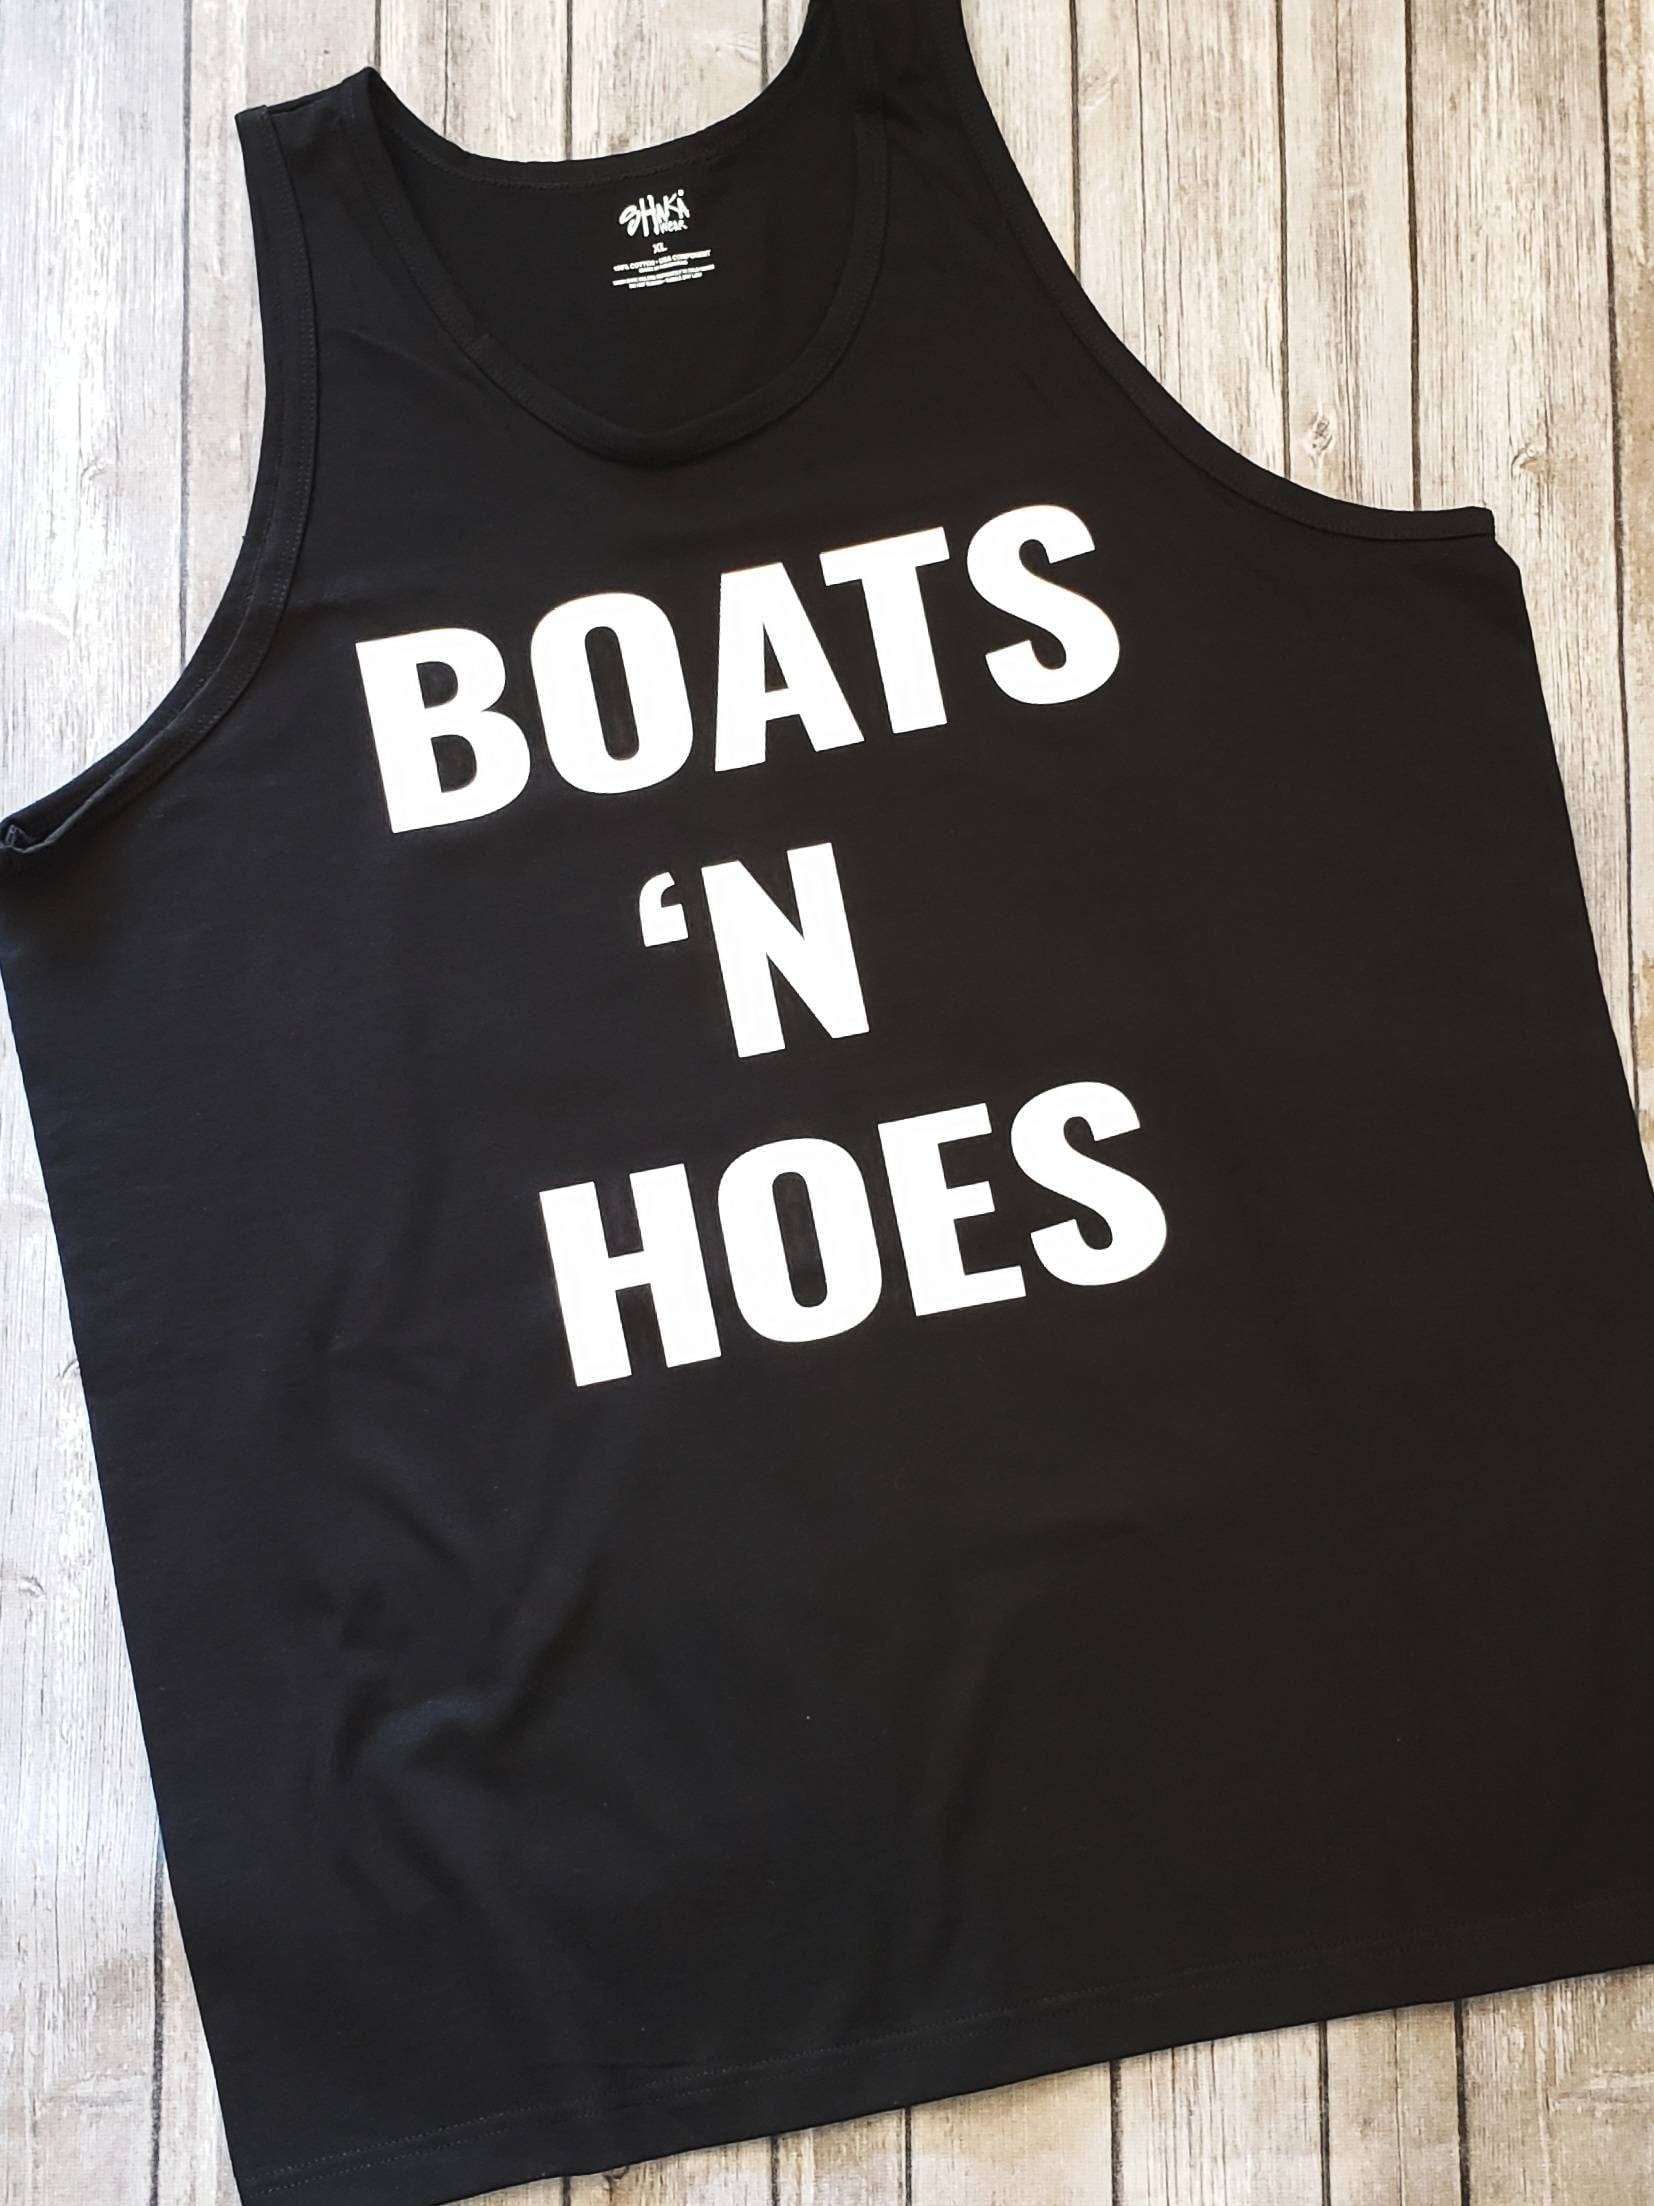 Boats N Hoes Men's Black Tank Top – Candy Wrapper Store